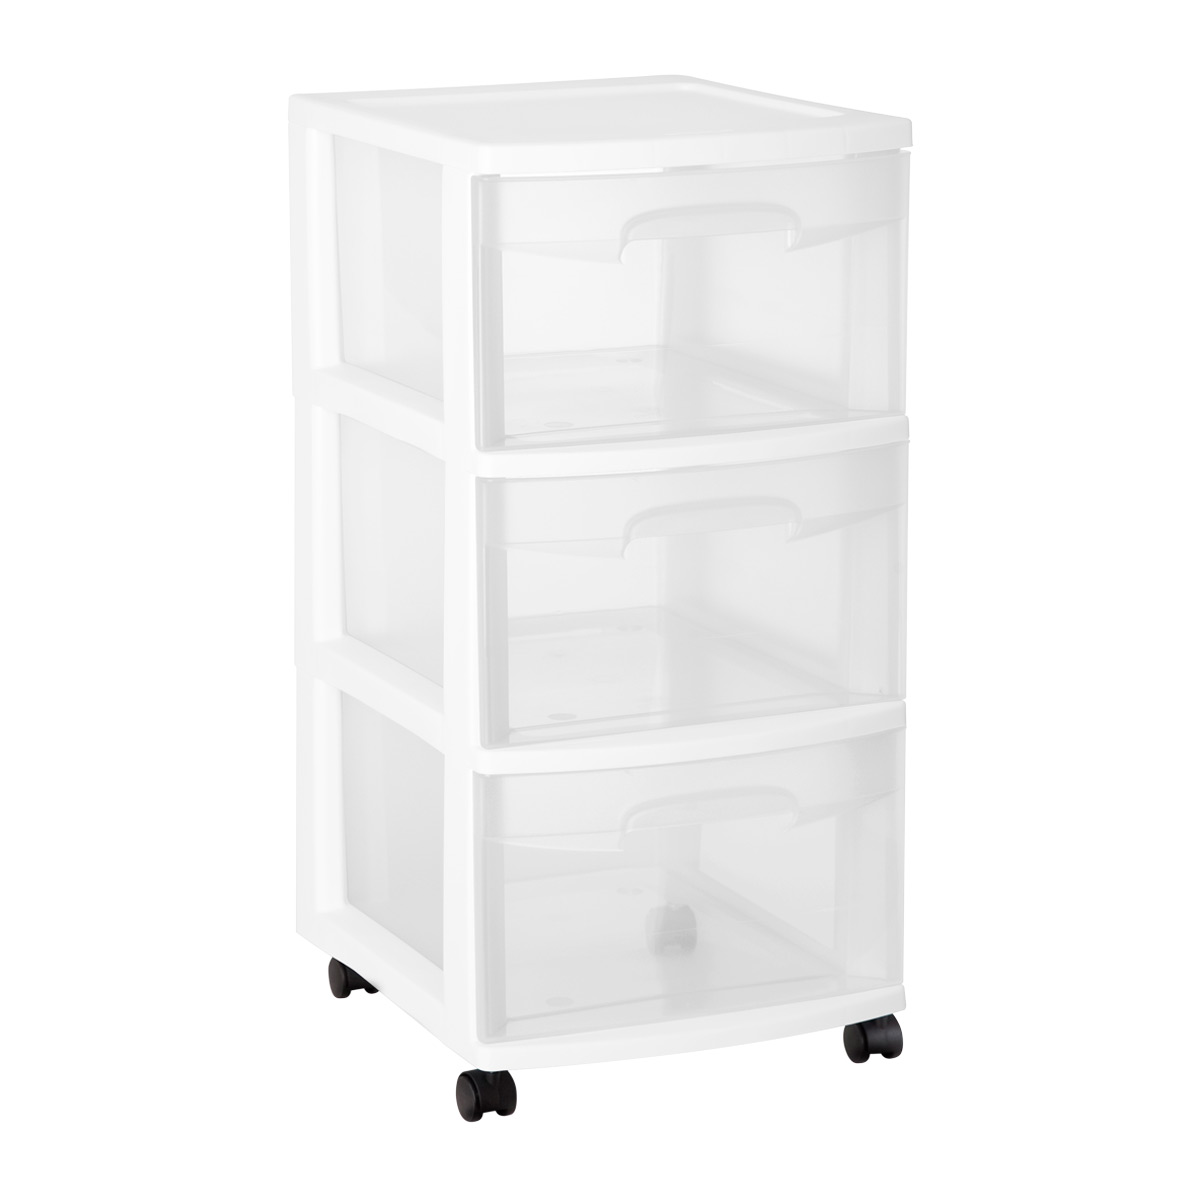 https://www.containerstore.com/catalogimages/369126/10077652-3-drawer-chest-white-clear-.jpg